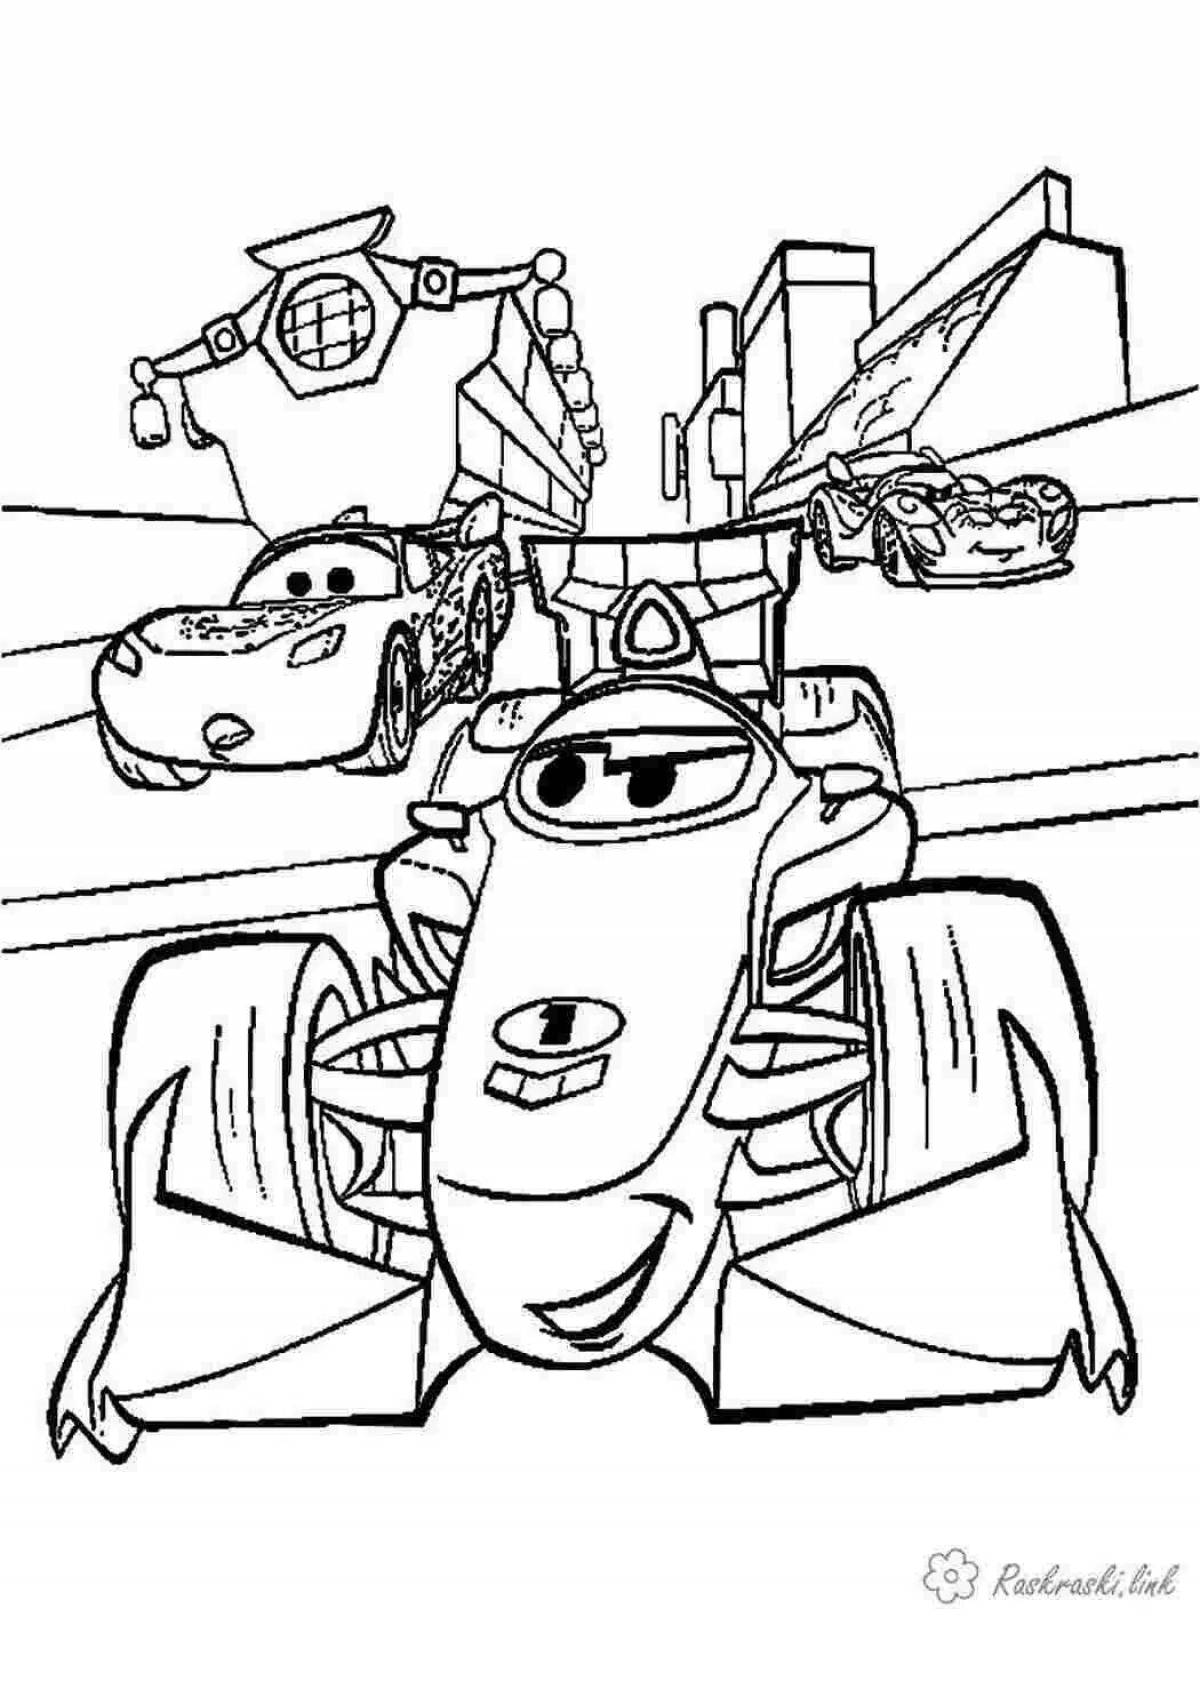 Creative coloring page 2 for boys